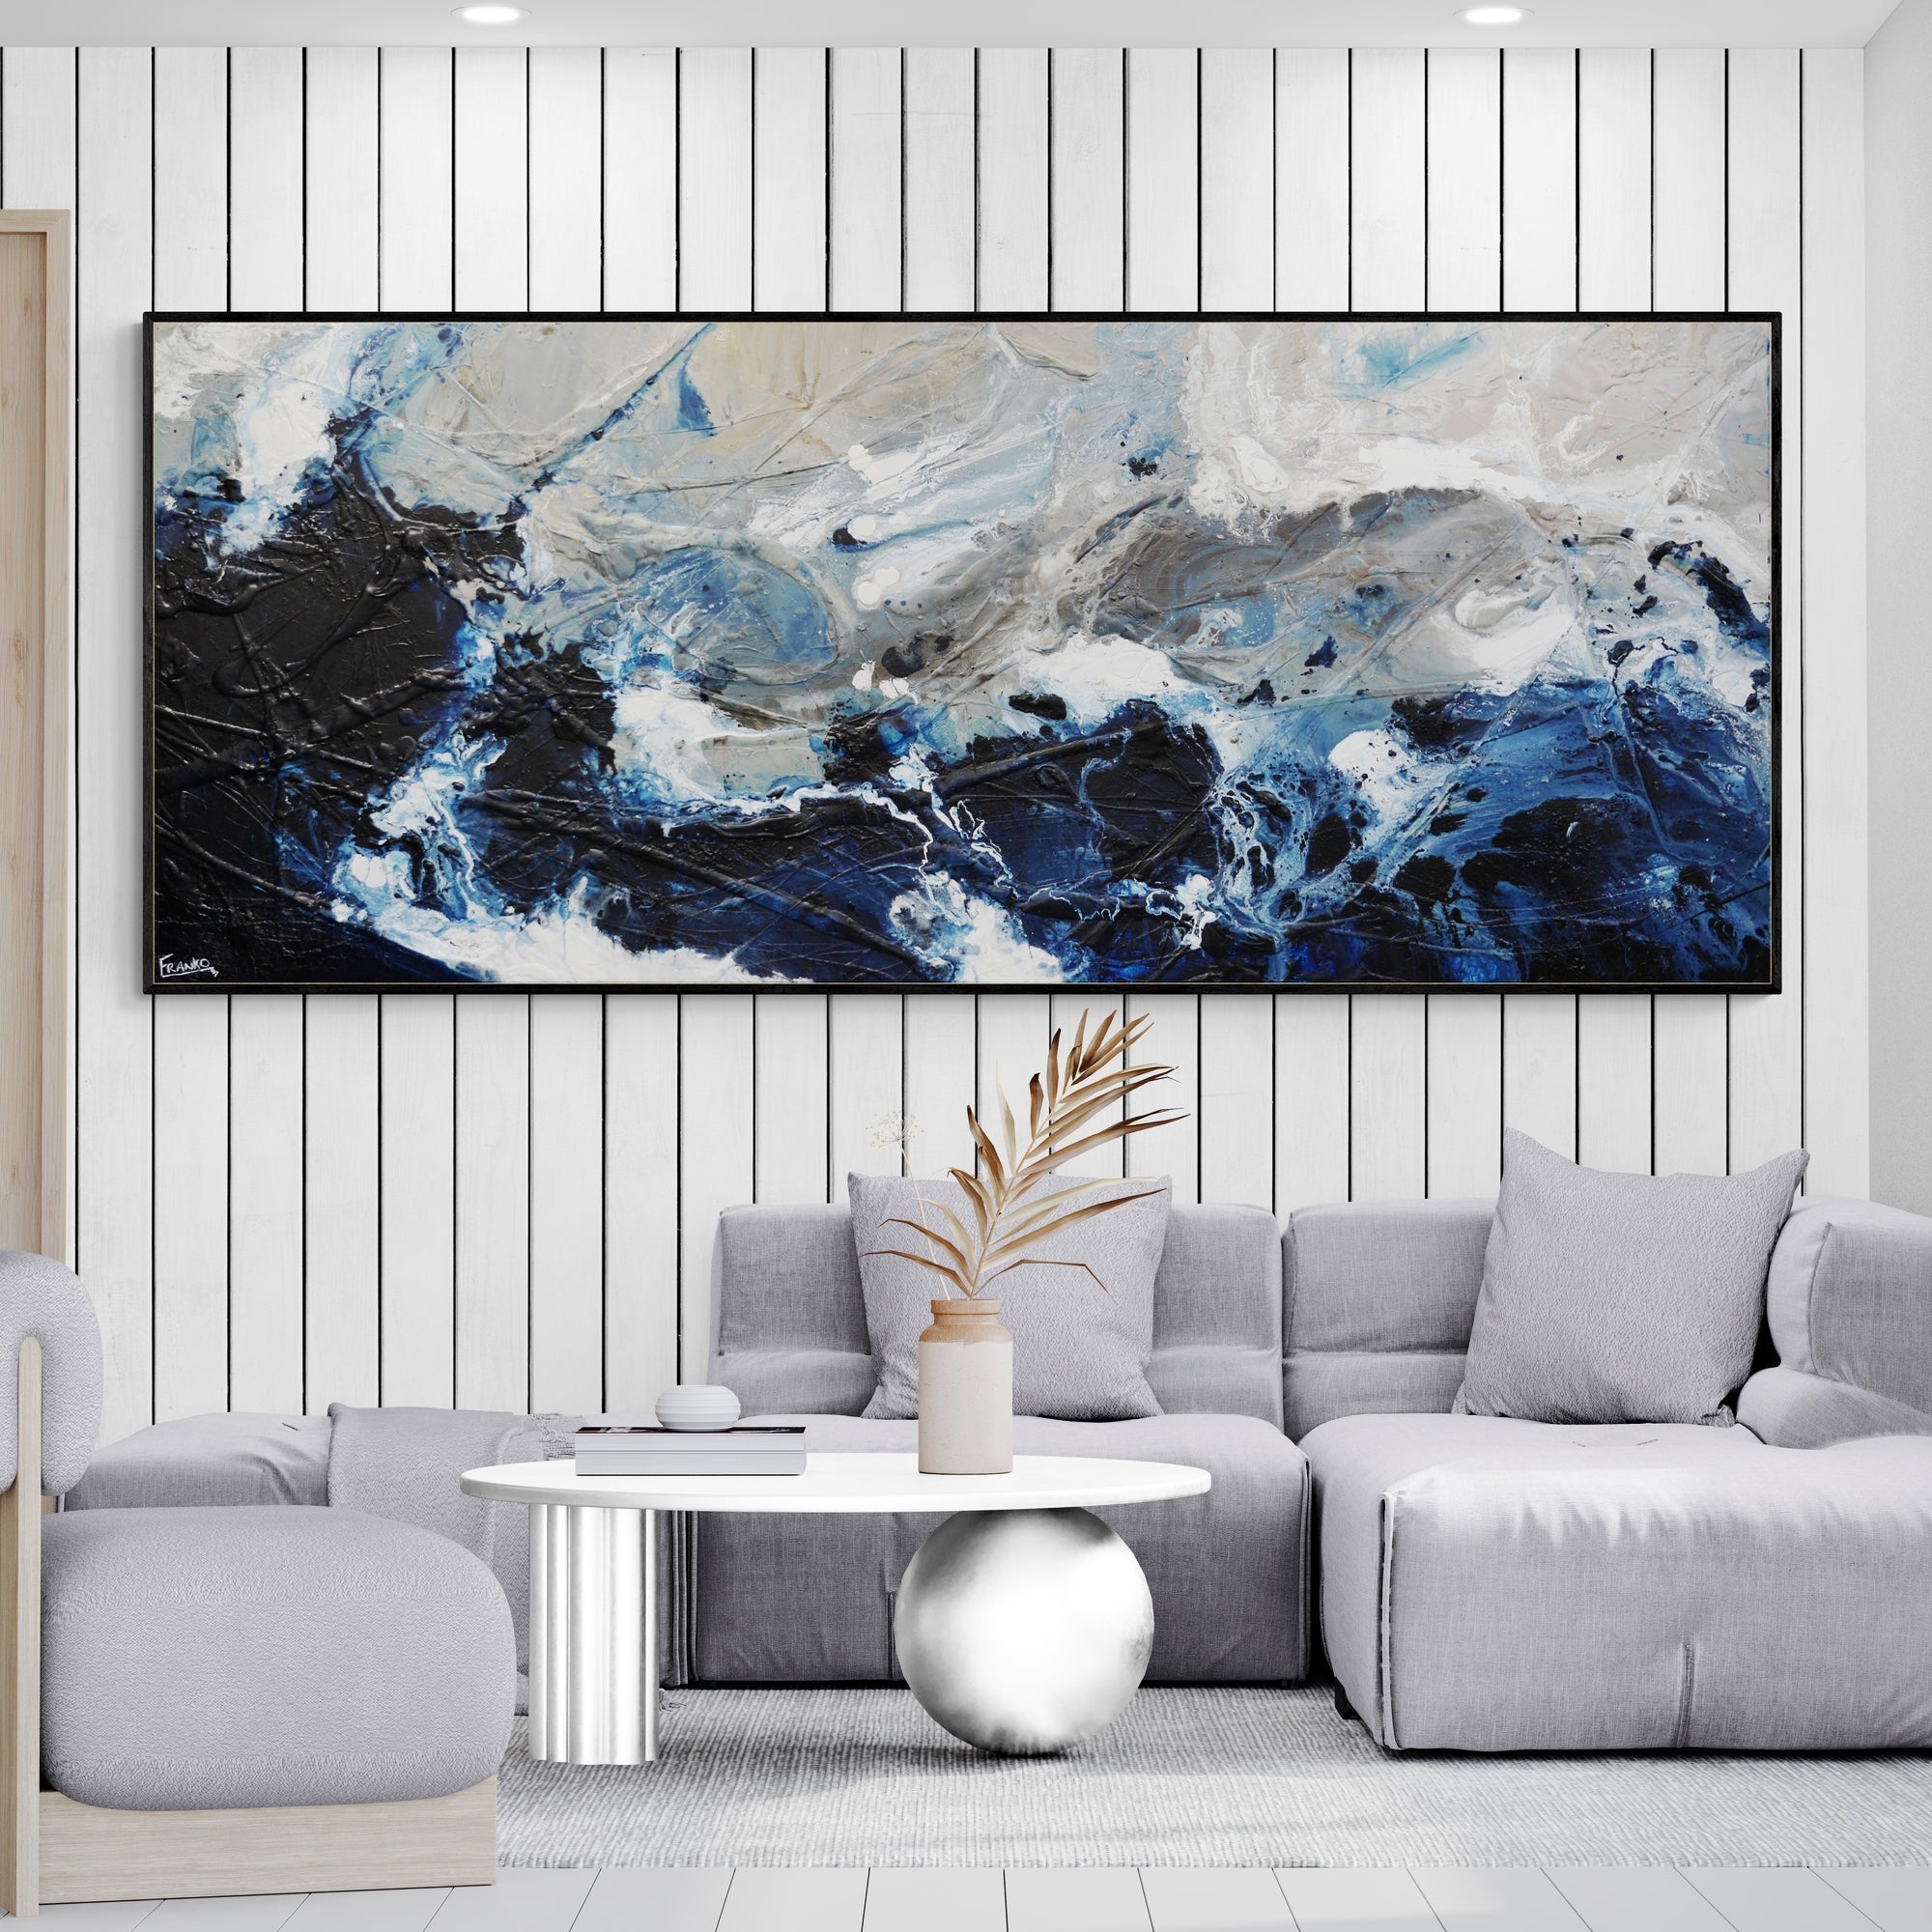 Midnight Mafia 240cm x 100cm Textured Abstract Painting (SOLD)